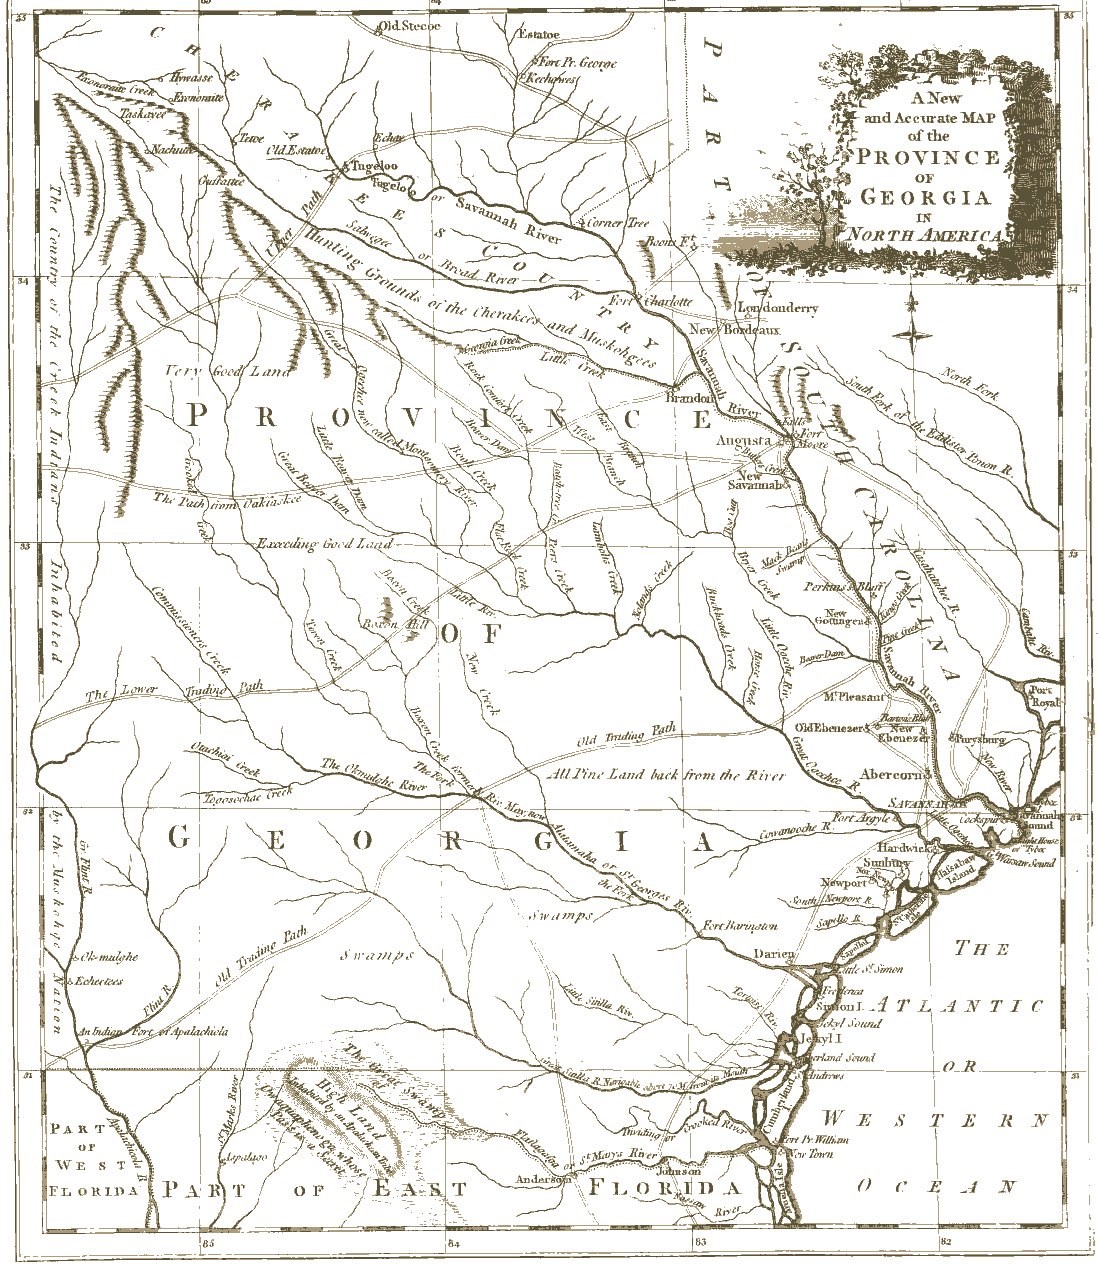 Image 7. Anonymously prepared map published in The Universal Magazine in 1779 indicating locations of trading paths (courtesy of Alabama Historical Map Archive and Rucker Agee Map Collection)